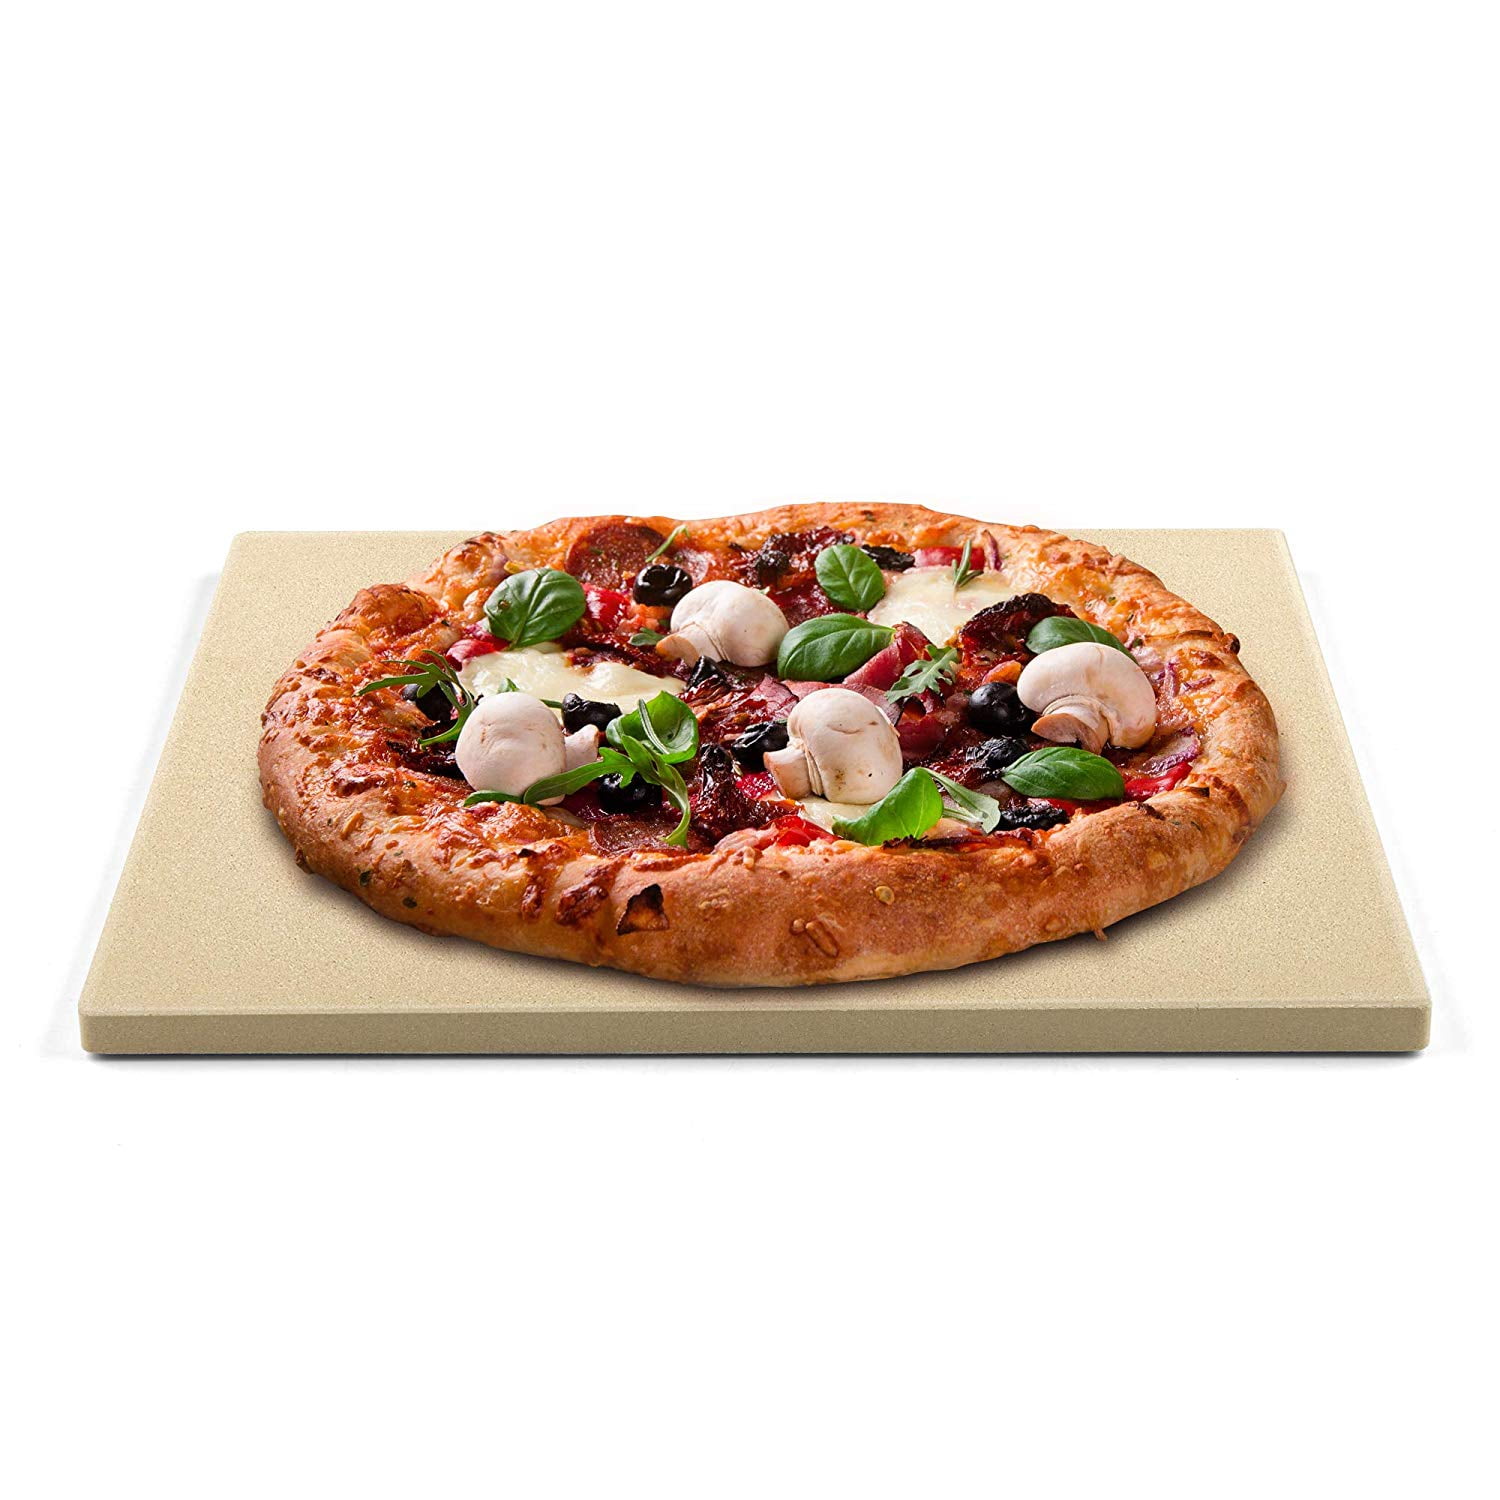 G.a HOMEFAVOR Pizza Stone 12x15inch Grilling&Baking Stone Pan for Oven and Grill 